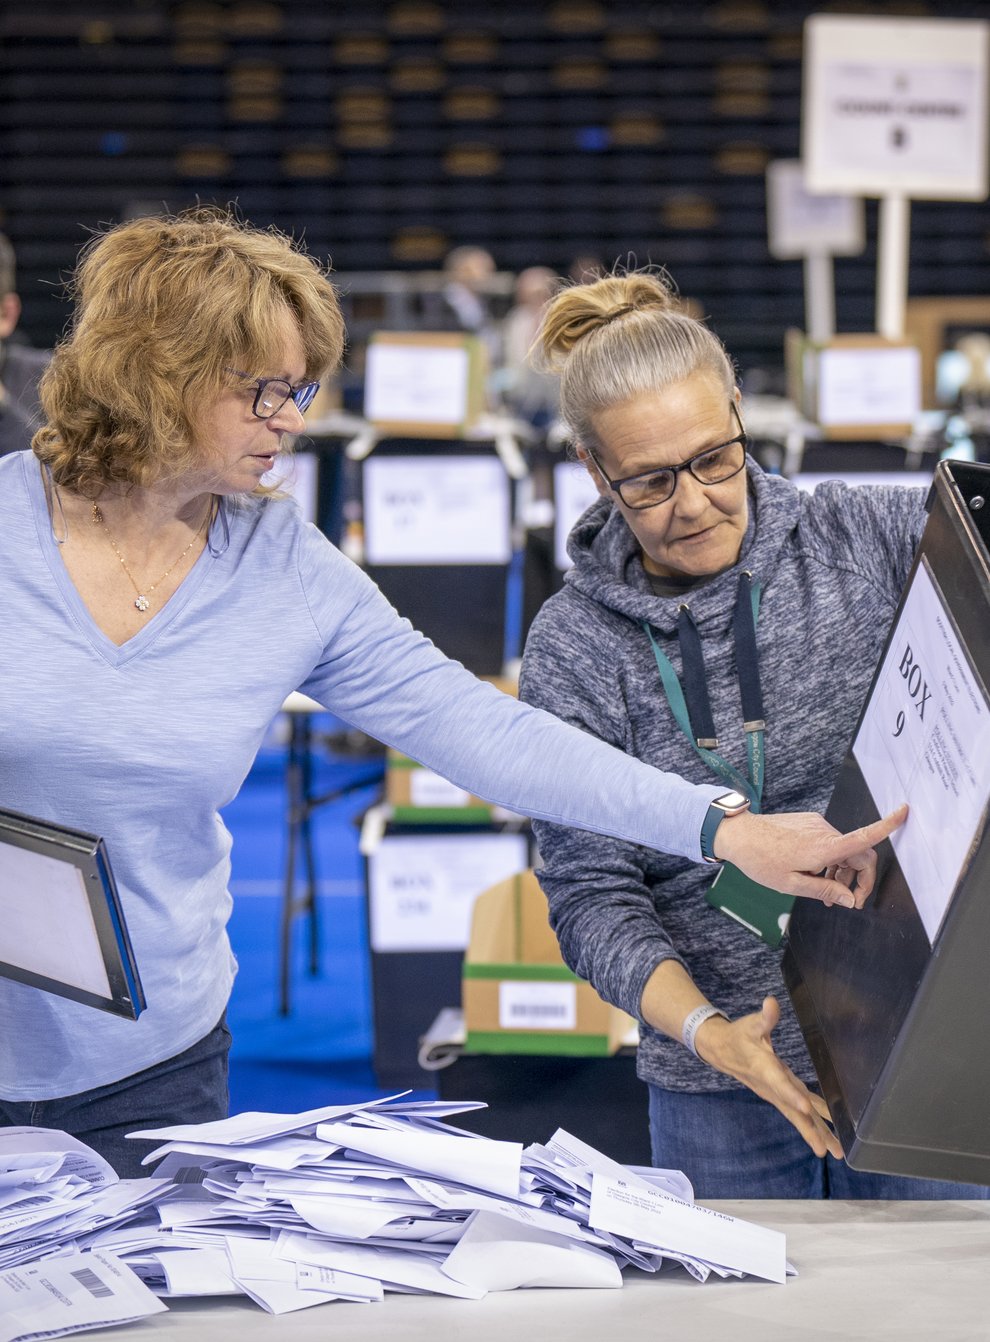 Votes are sorted at the Glasgow City Council count at the Emirates Arena (Jane Barlow/PA)